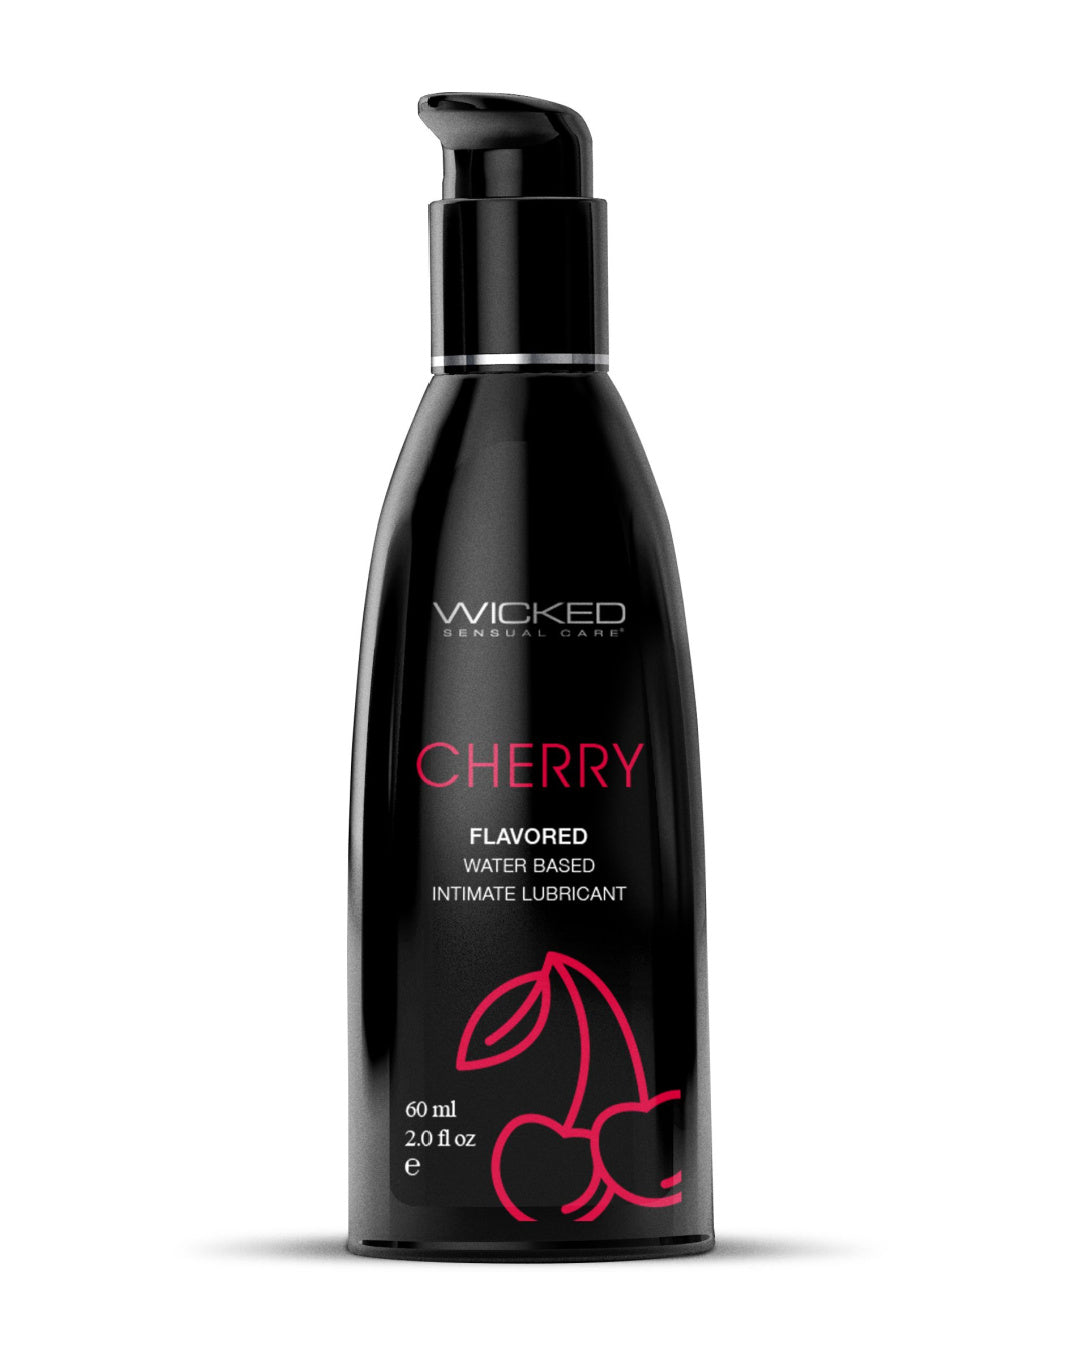 Wicked Aqua Cherry Flavored Water Based Lubricant 2 oz black bottle red writing 